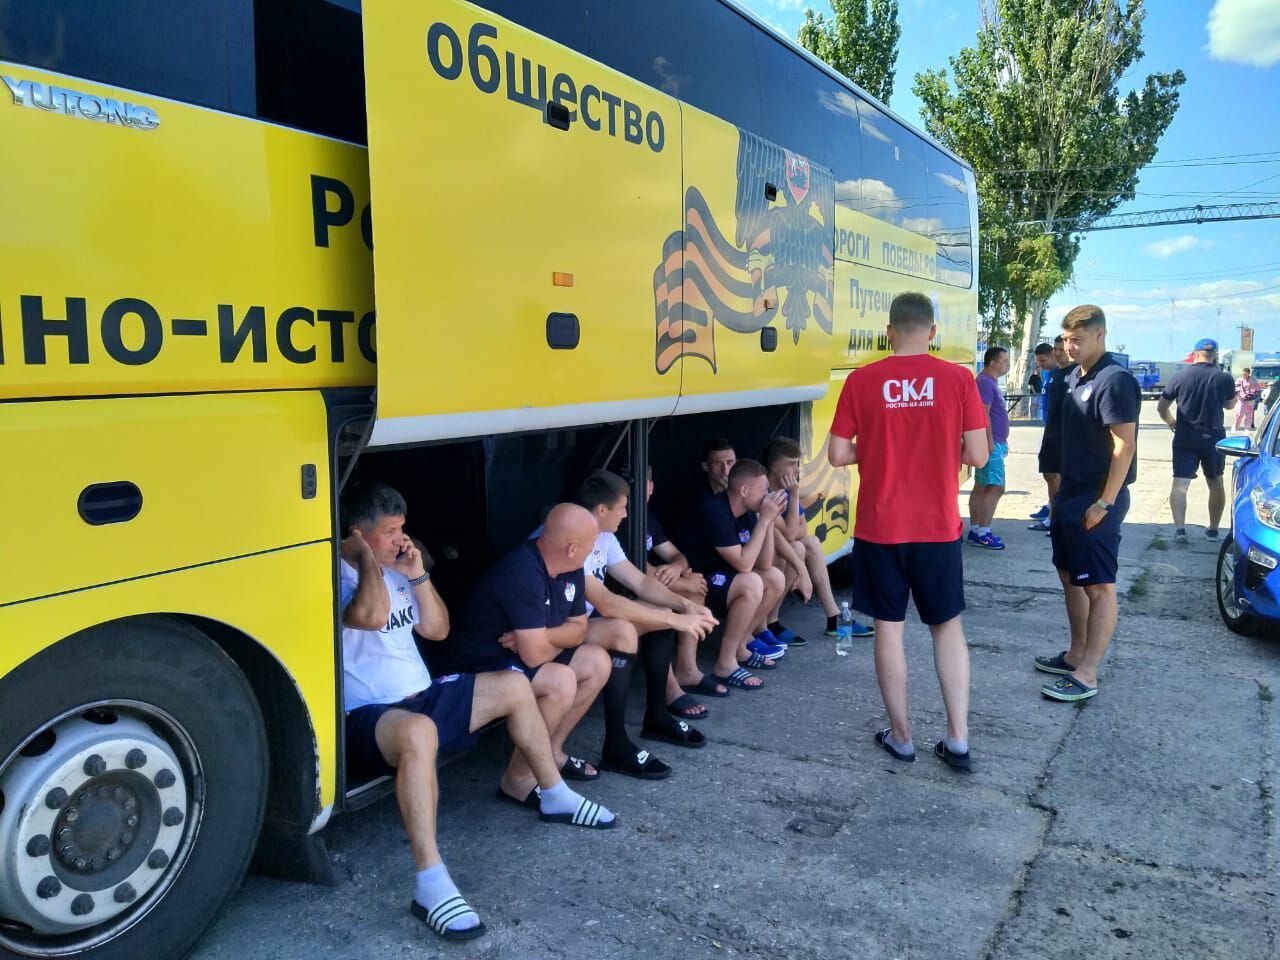 Bus nearly collapses: Russian footballers under attack on Crimean bridge after game in Sevastopol